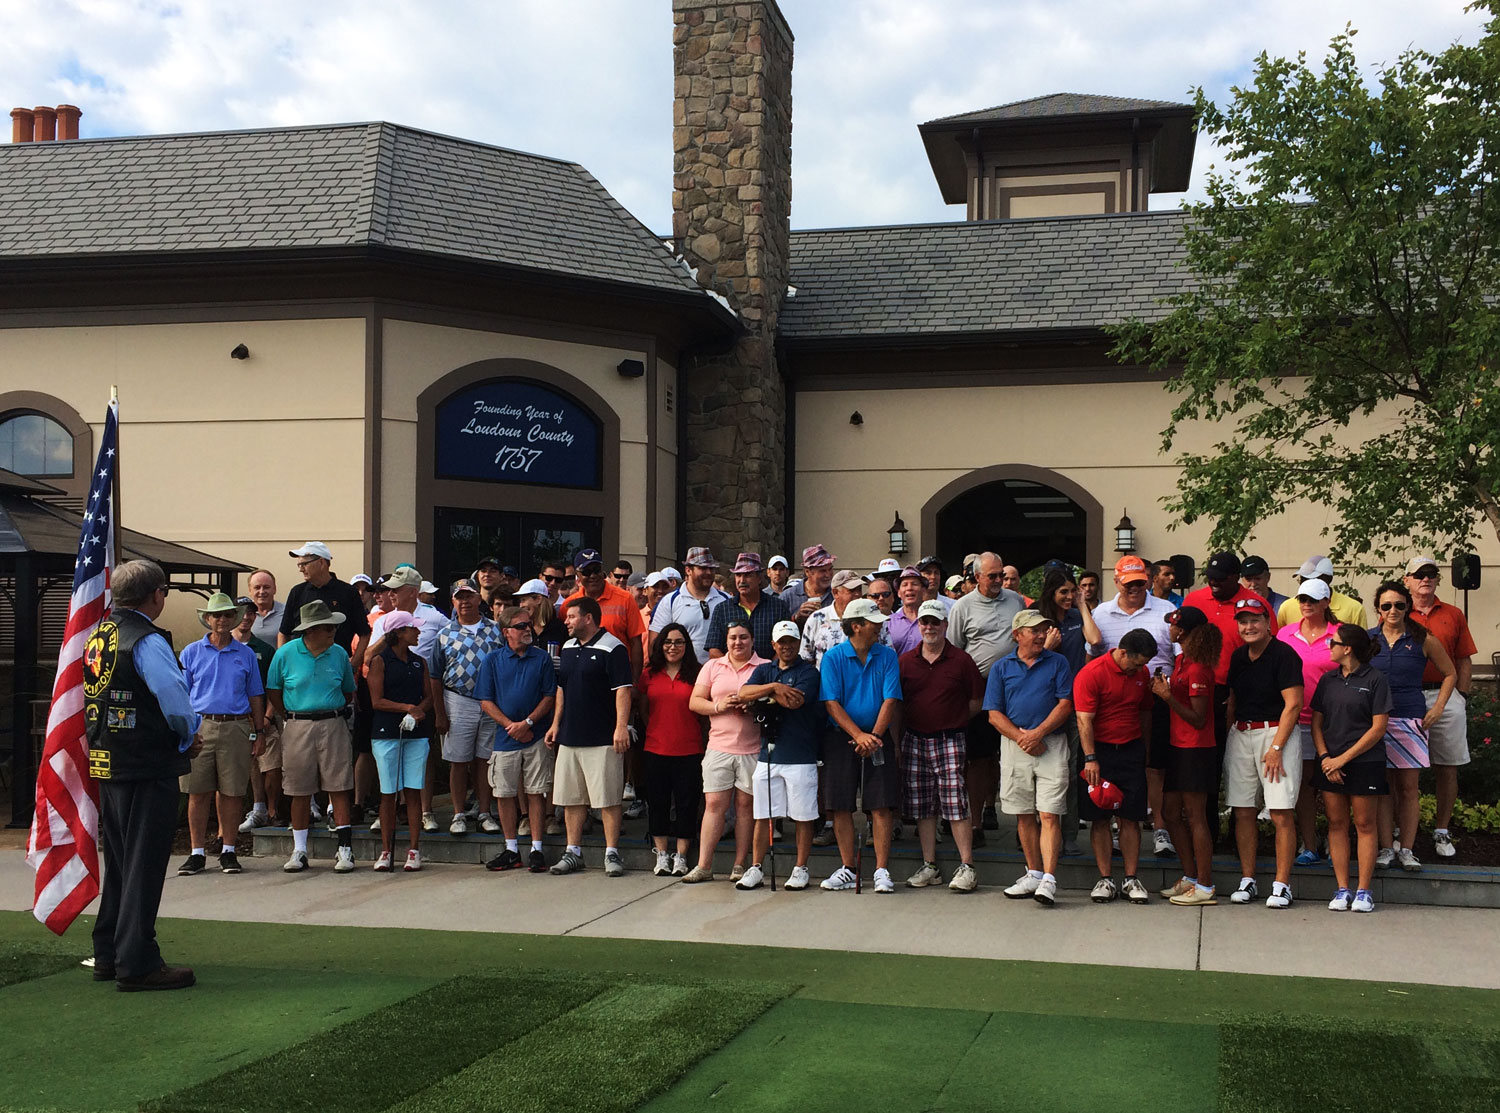 The group of golfers who participated in the WLGO at 1757. (WTOP/Noah Frank)